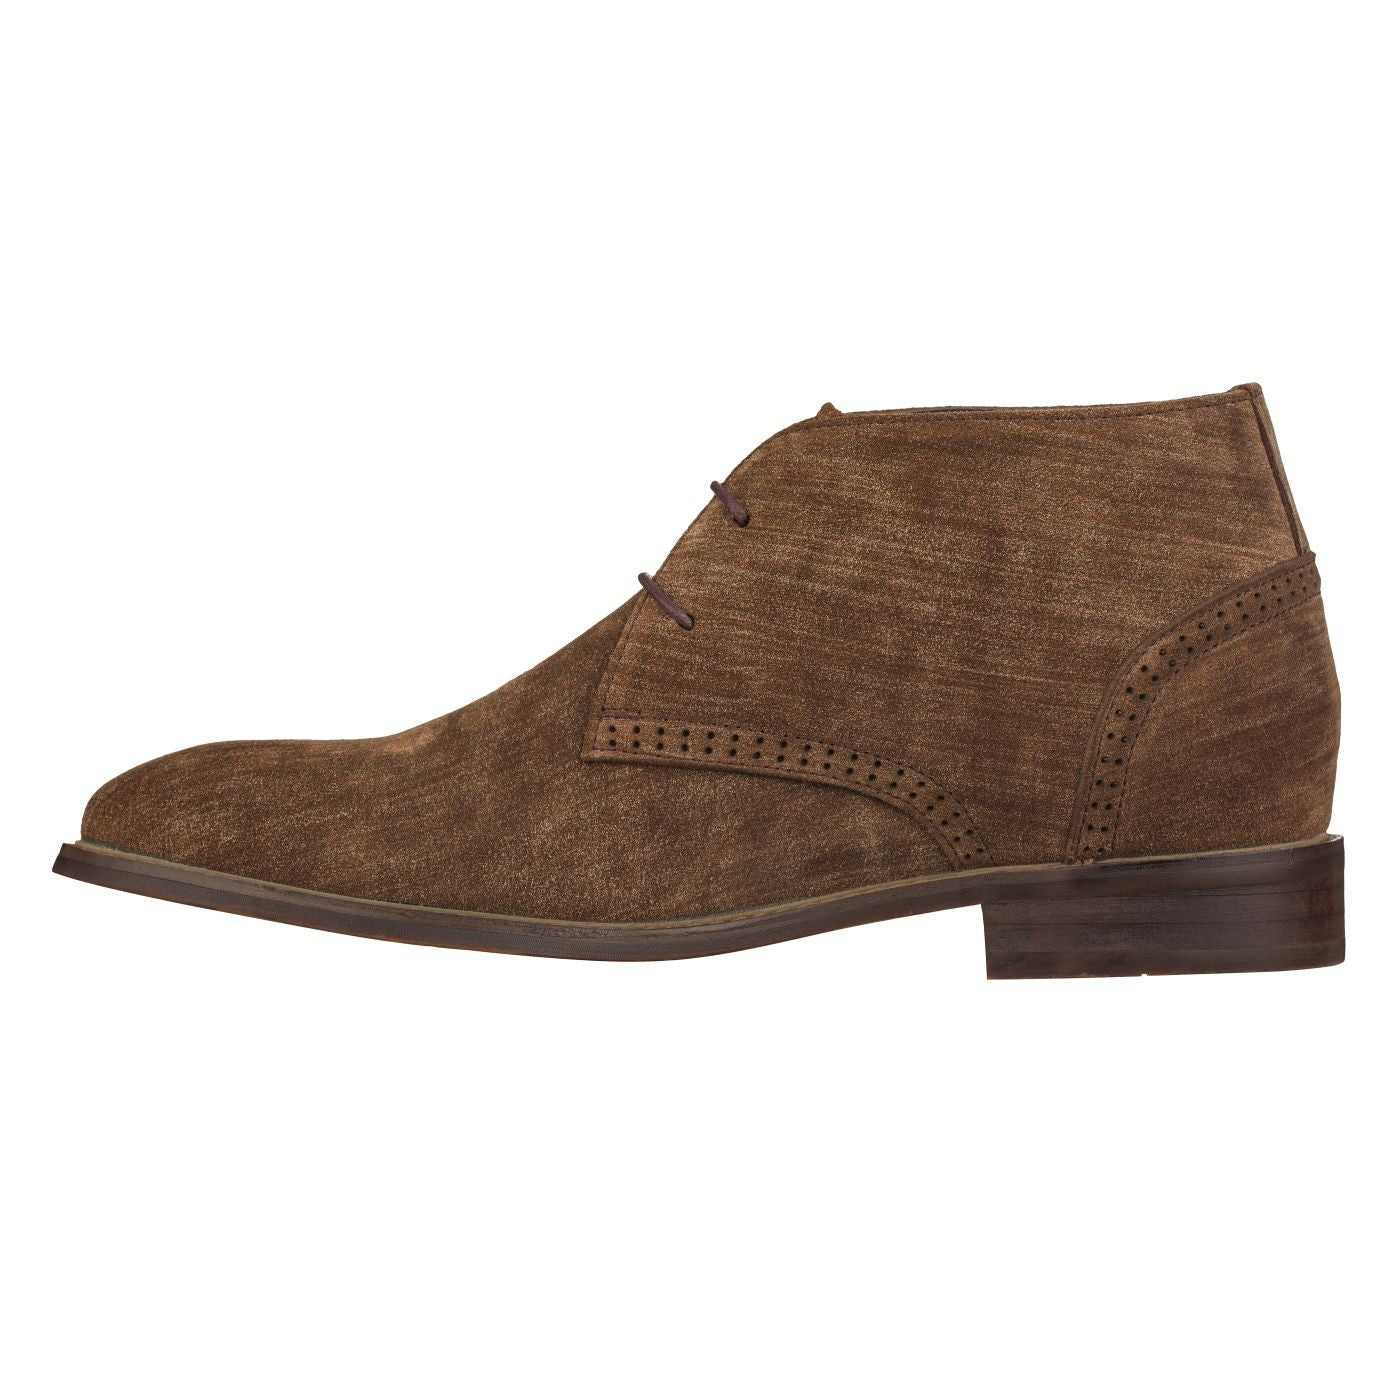 Elevator shoes height increase CALTO - S9093 - 3.0 Inches Taller (Coffee Brown) - Chukka Boots